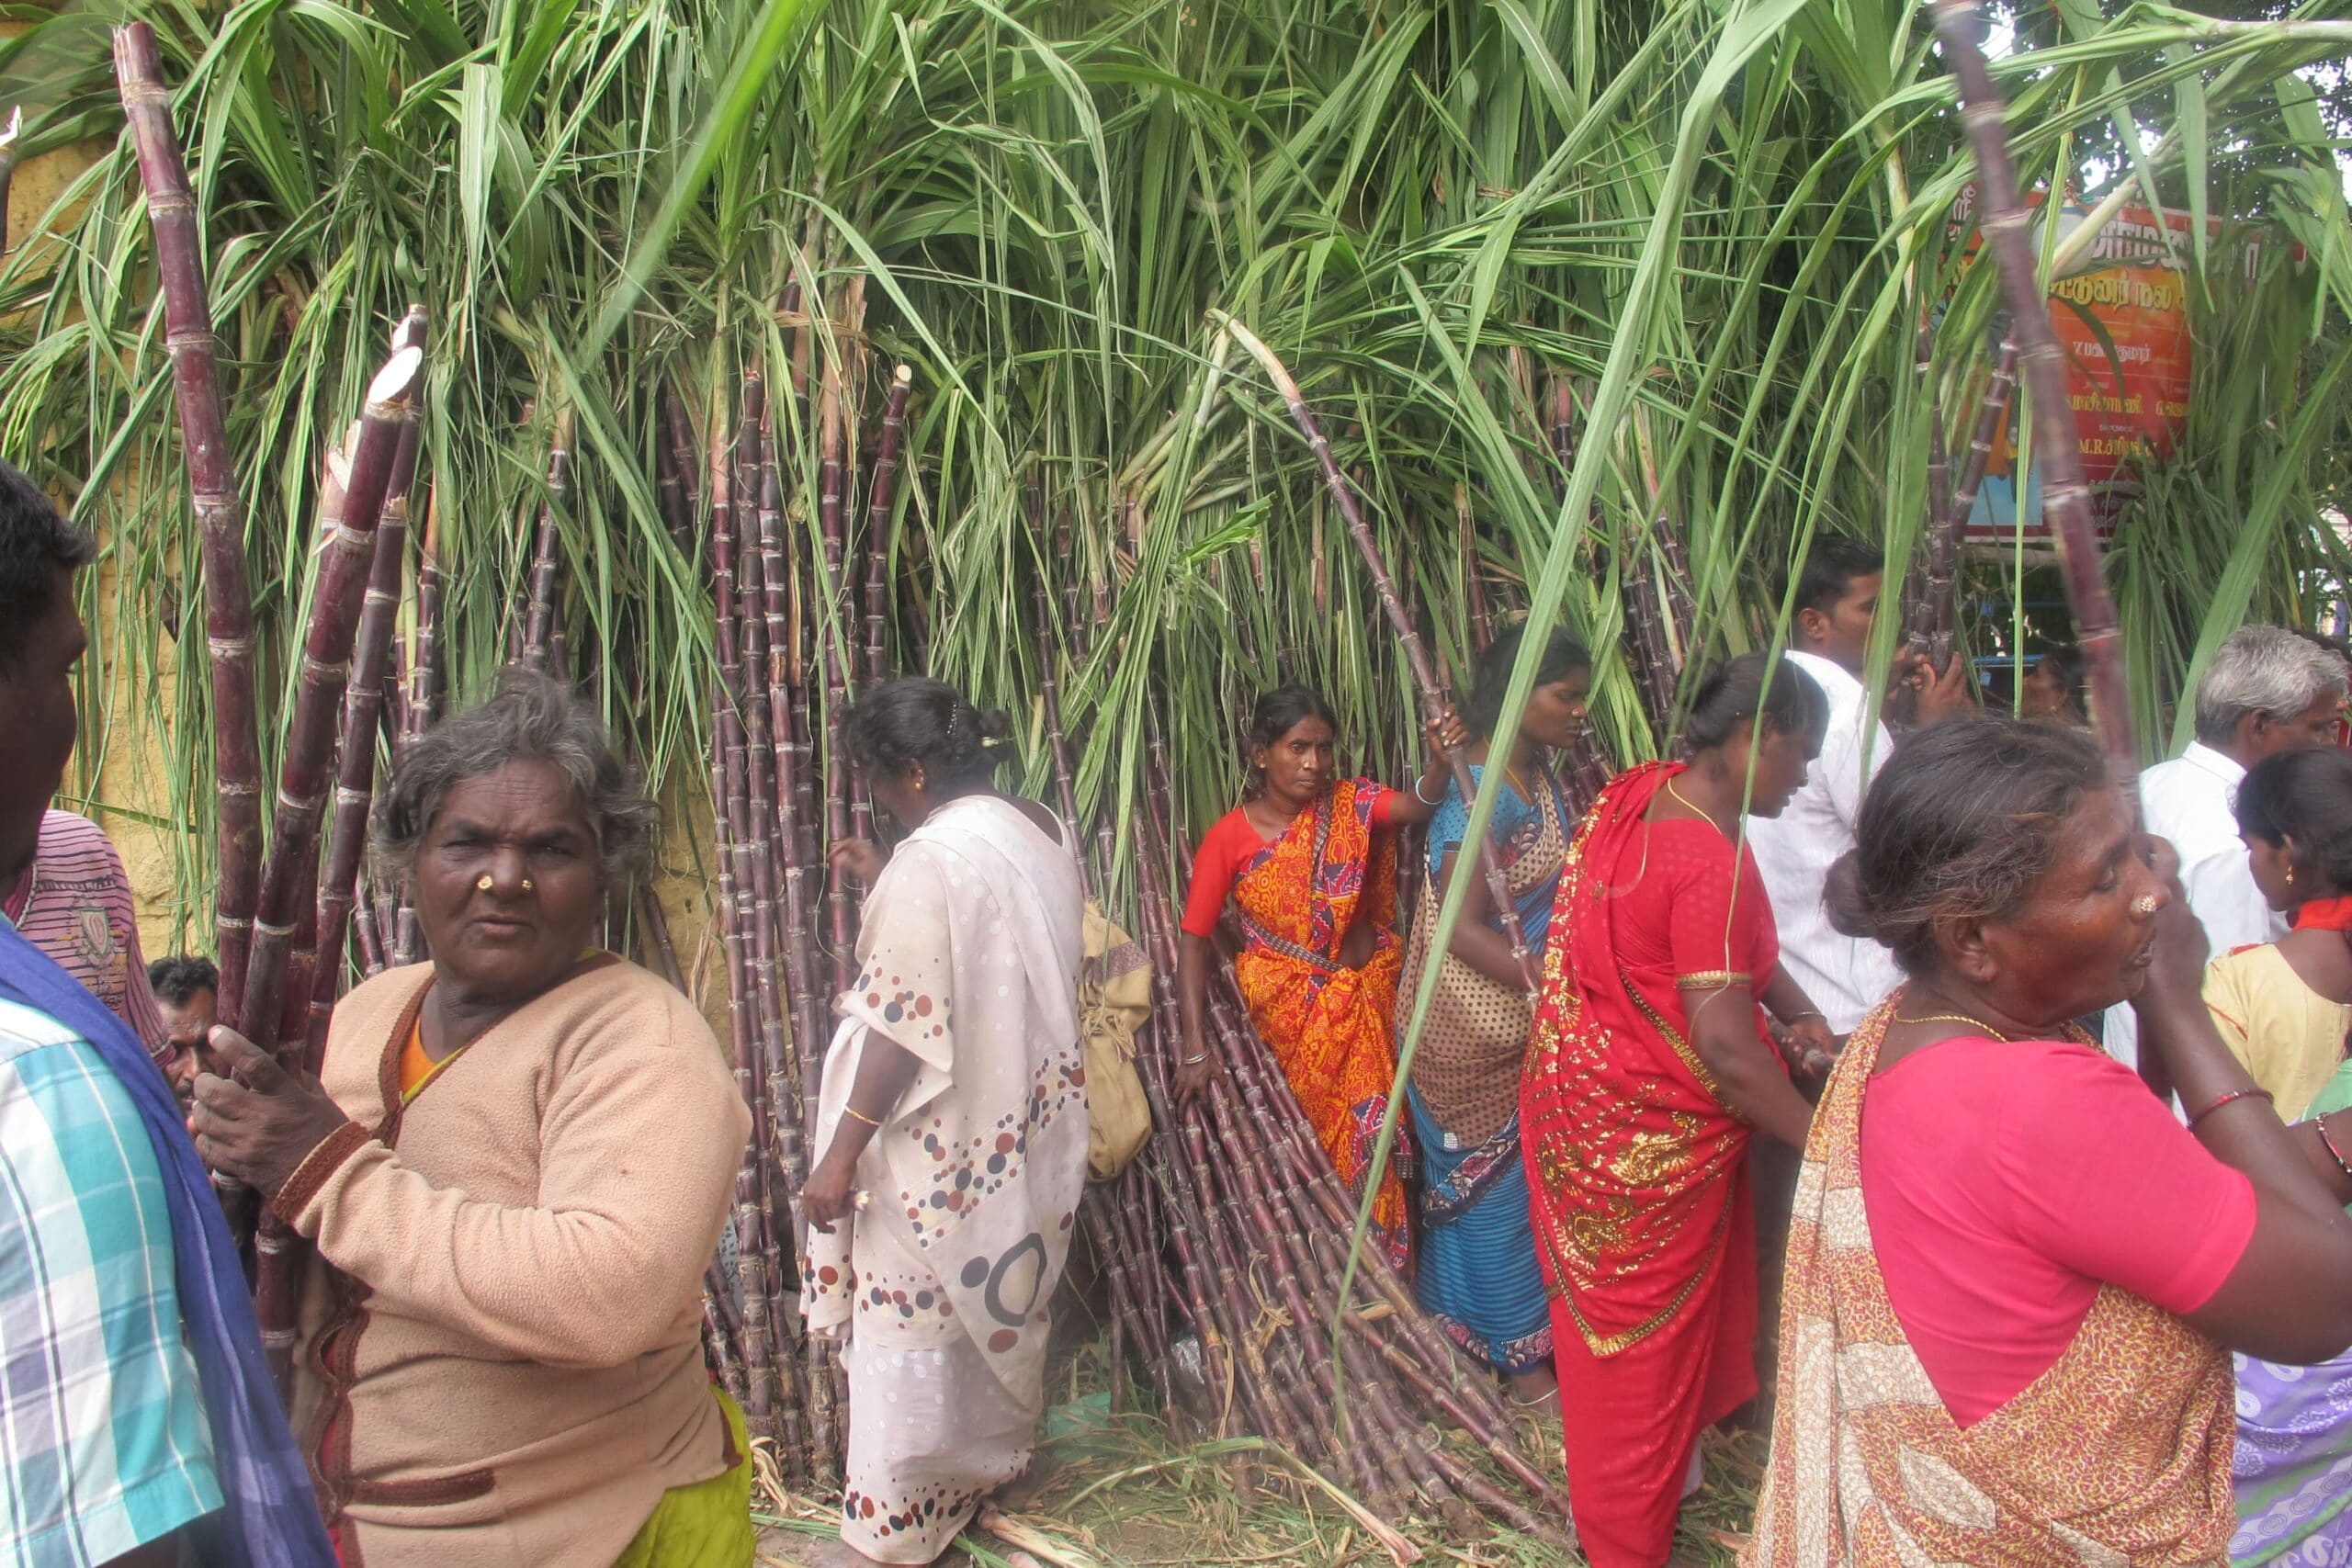 A group of people harvesting raw sugar cane